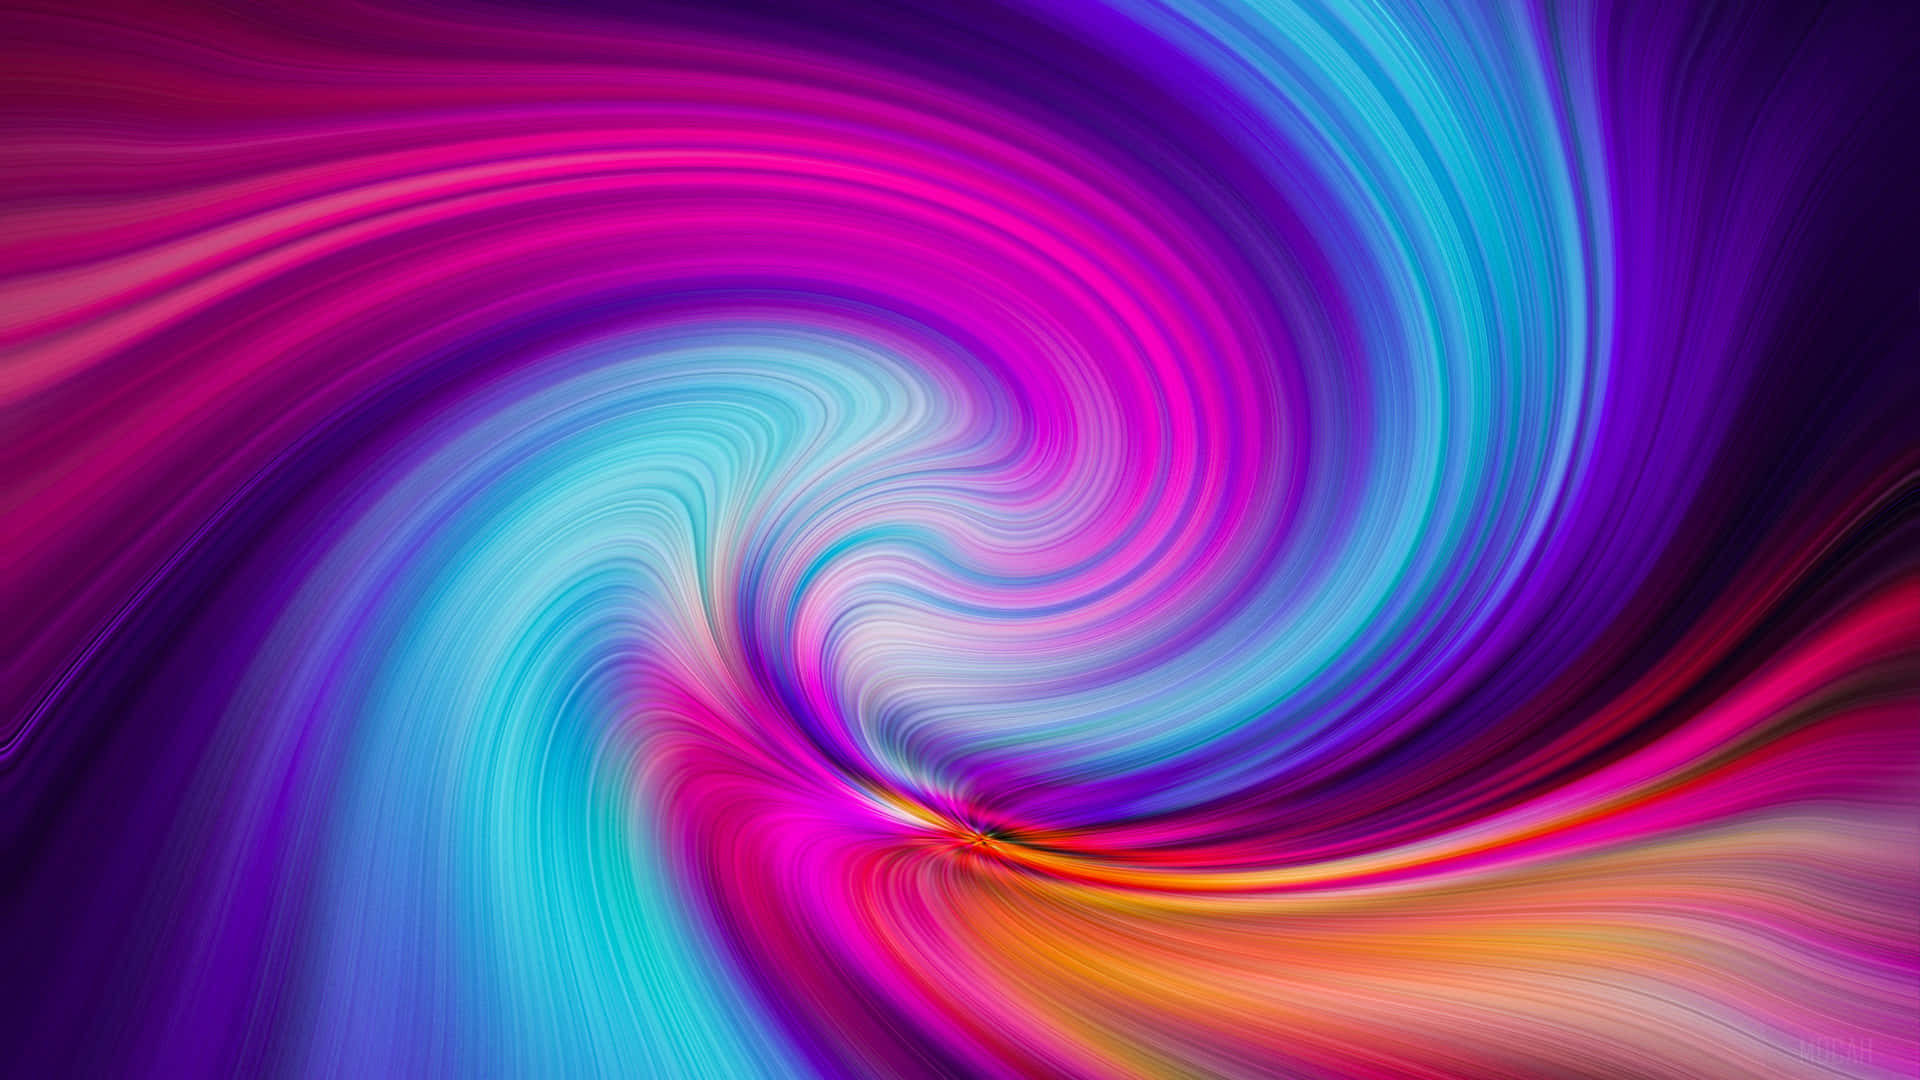 170 Swirl HD Wallpapers and Backgrounds